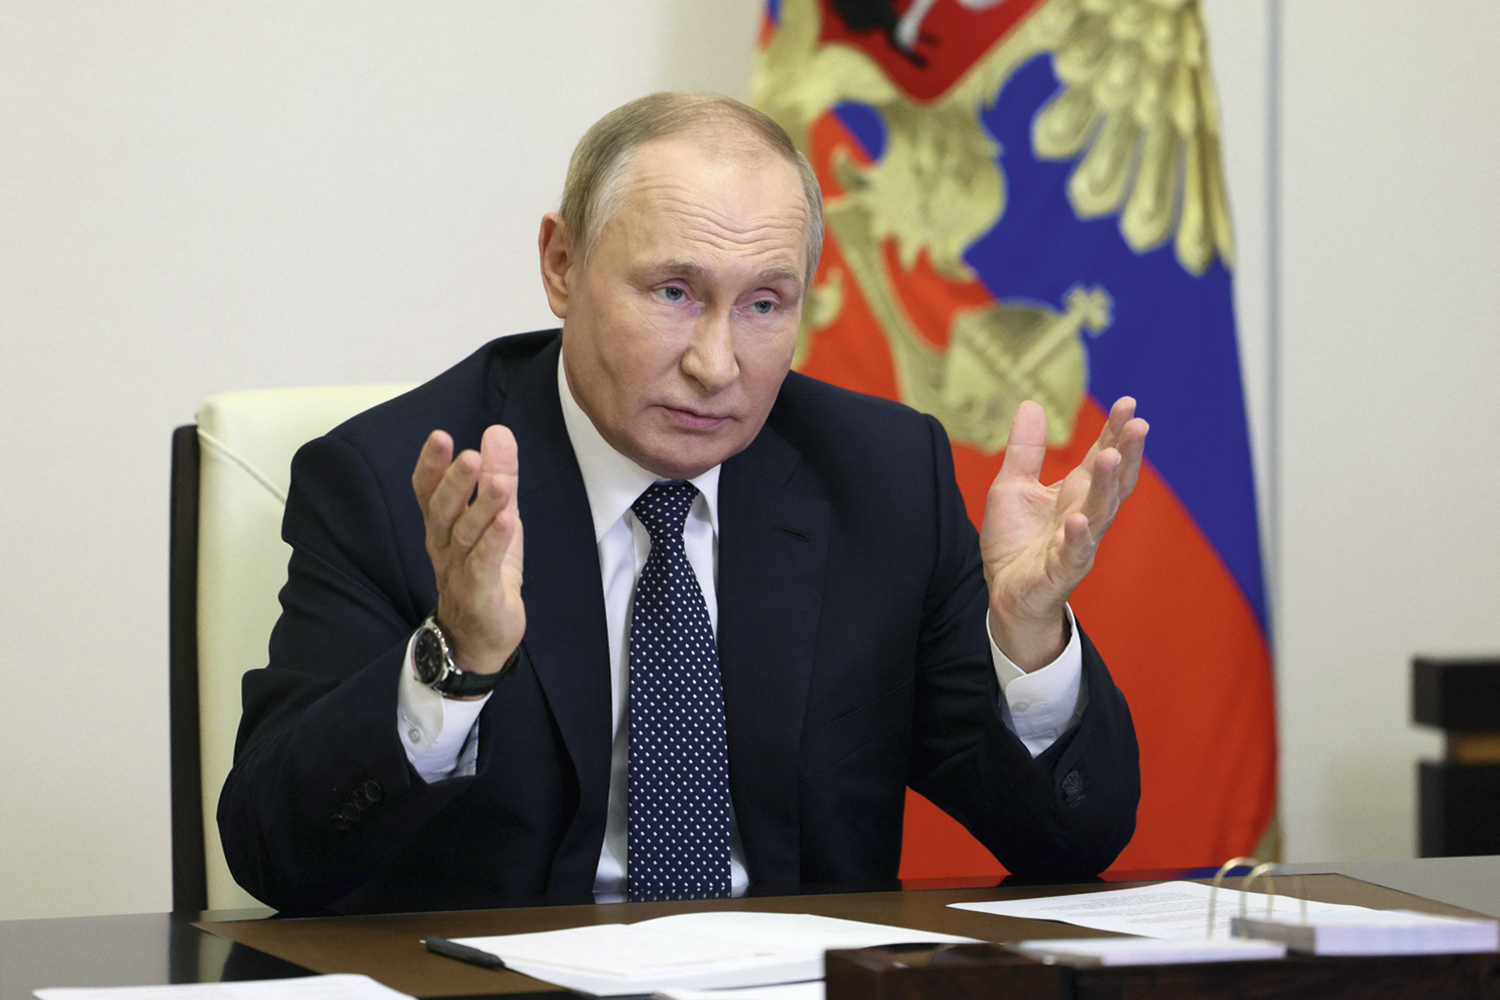 CLIMBING - Putin: missiles are errands for hardliners and the West -